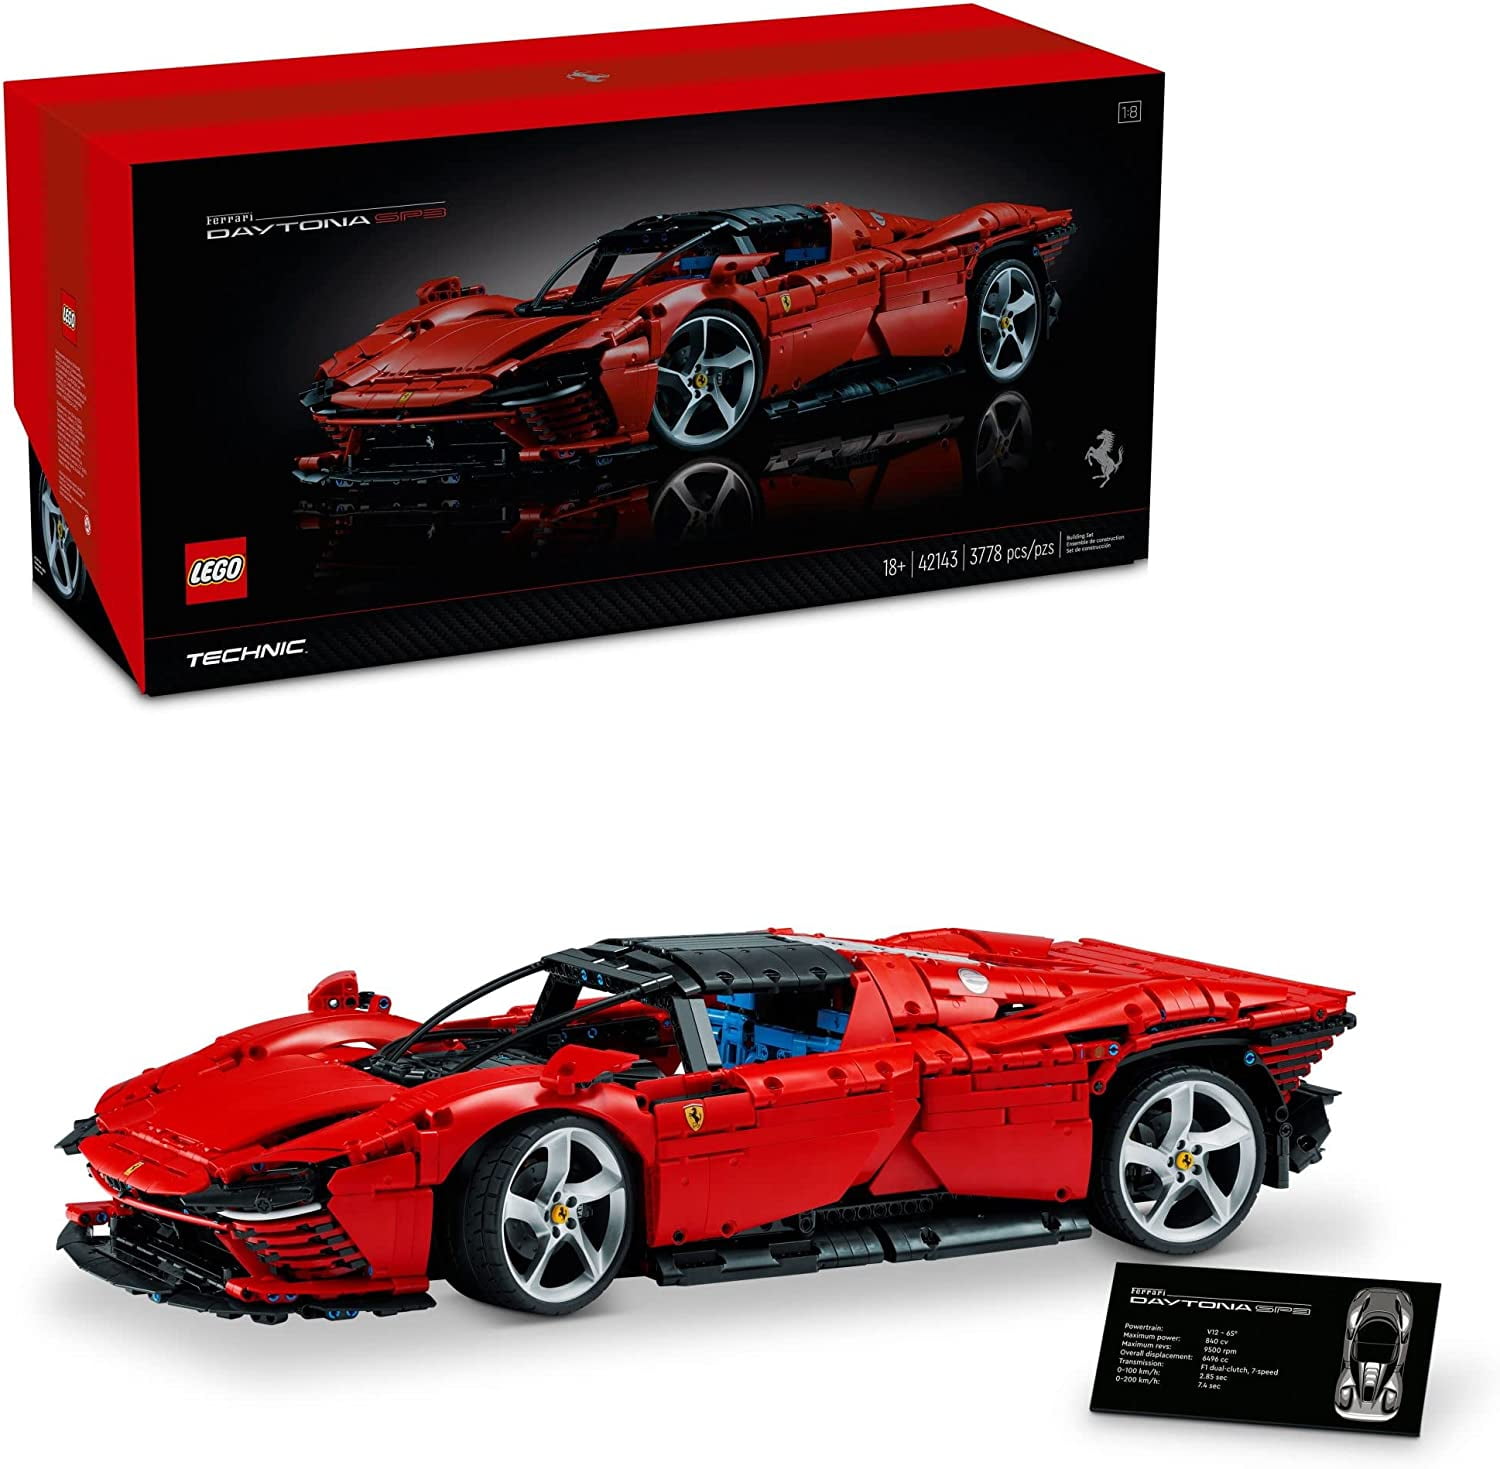 LEGO Technic Ferrari Daytona SP3 42143, Race Car Model Building Kit, 1:8  Scale Advanced Collectible Set for Adults, Gift for Car Lover 